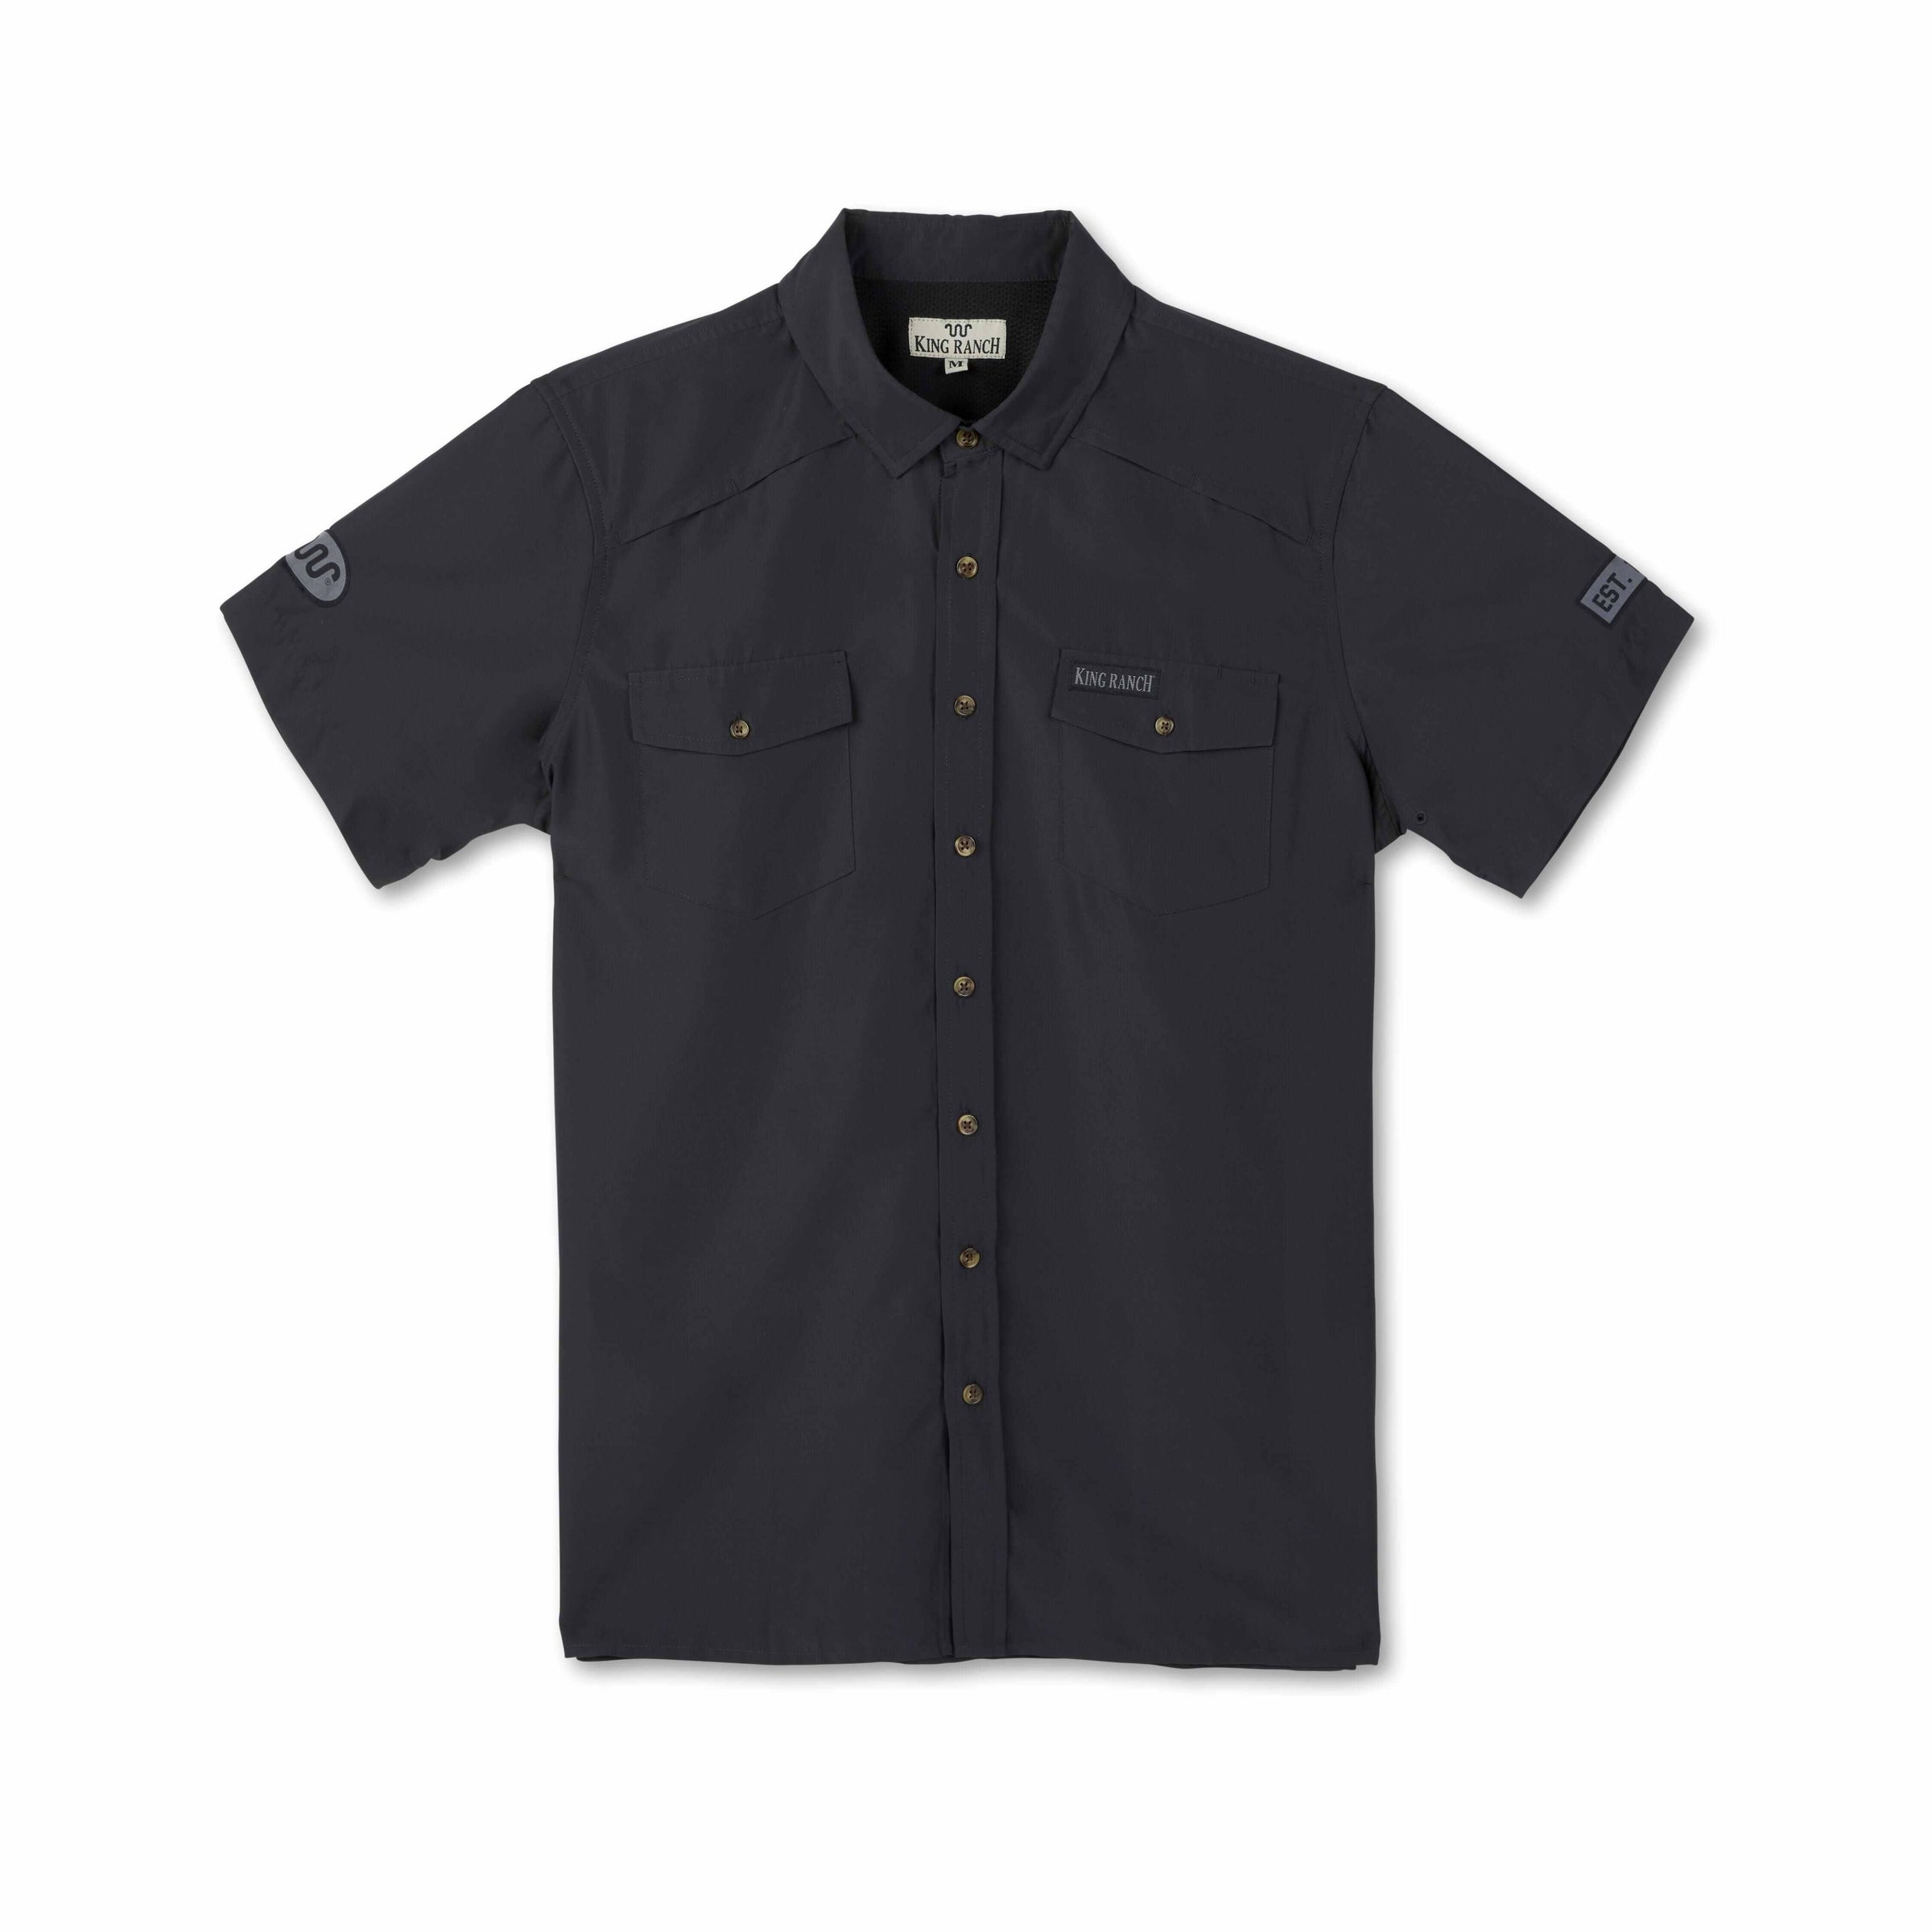 S/S Classic Fishing Shirt with KR Badges